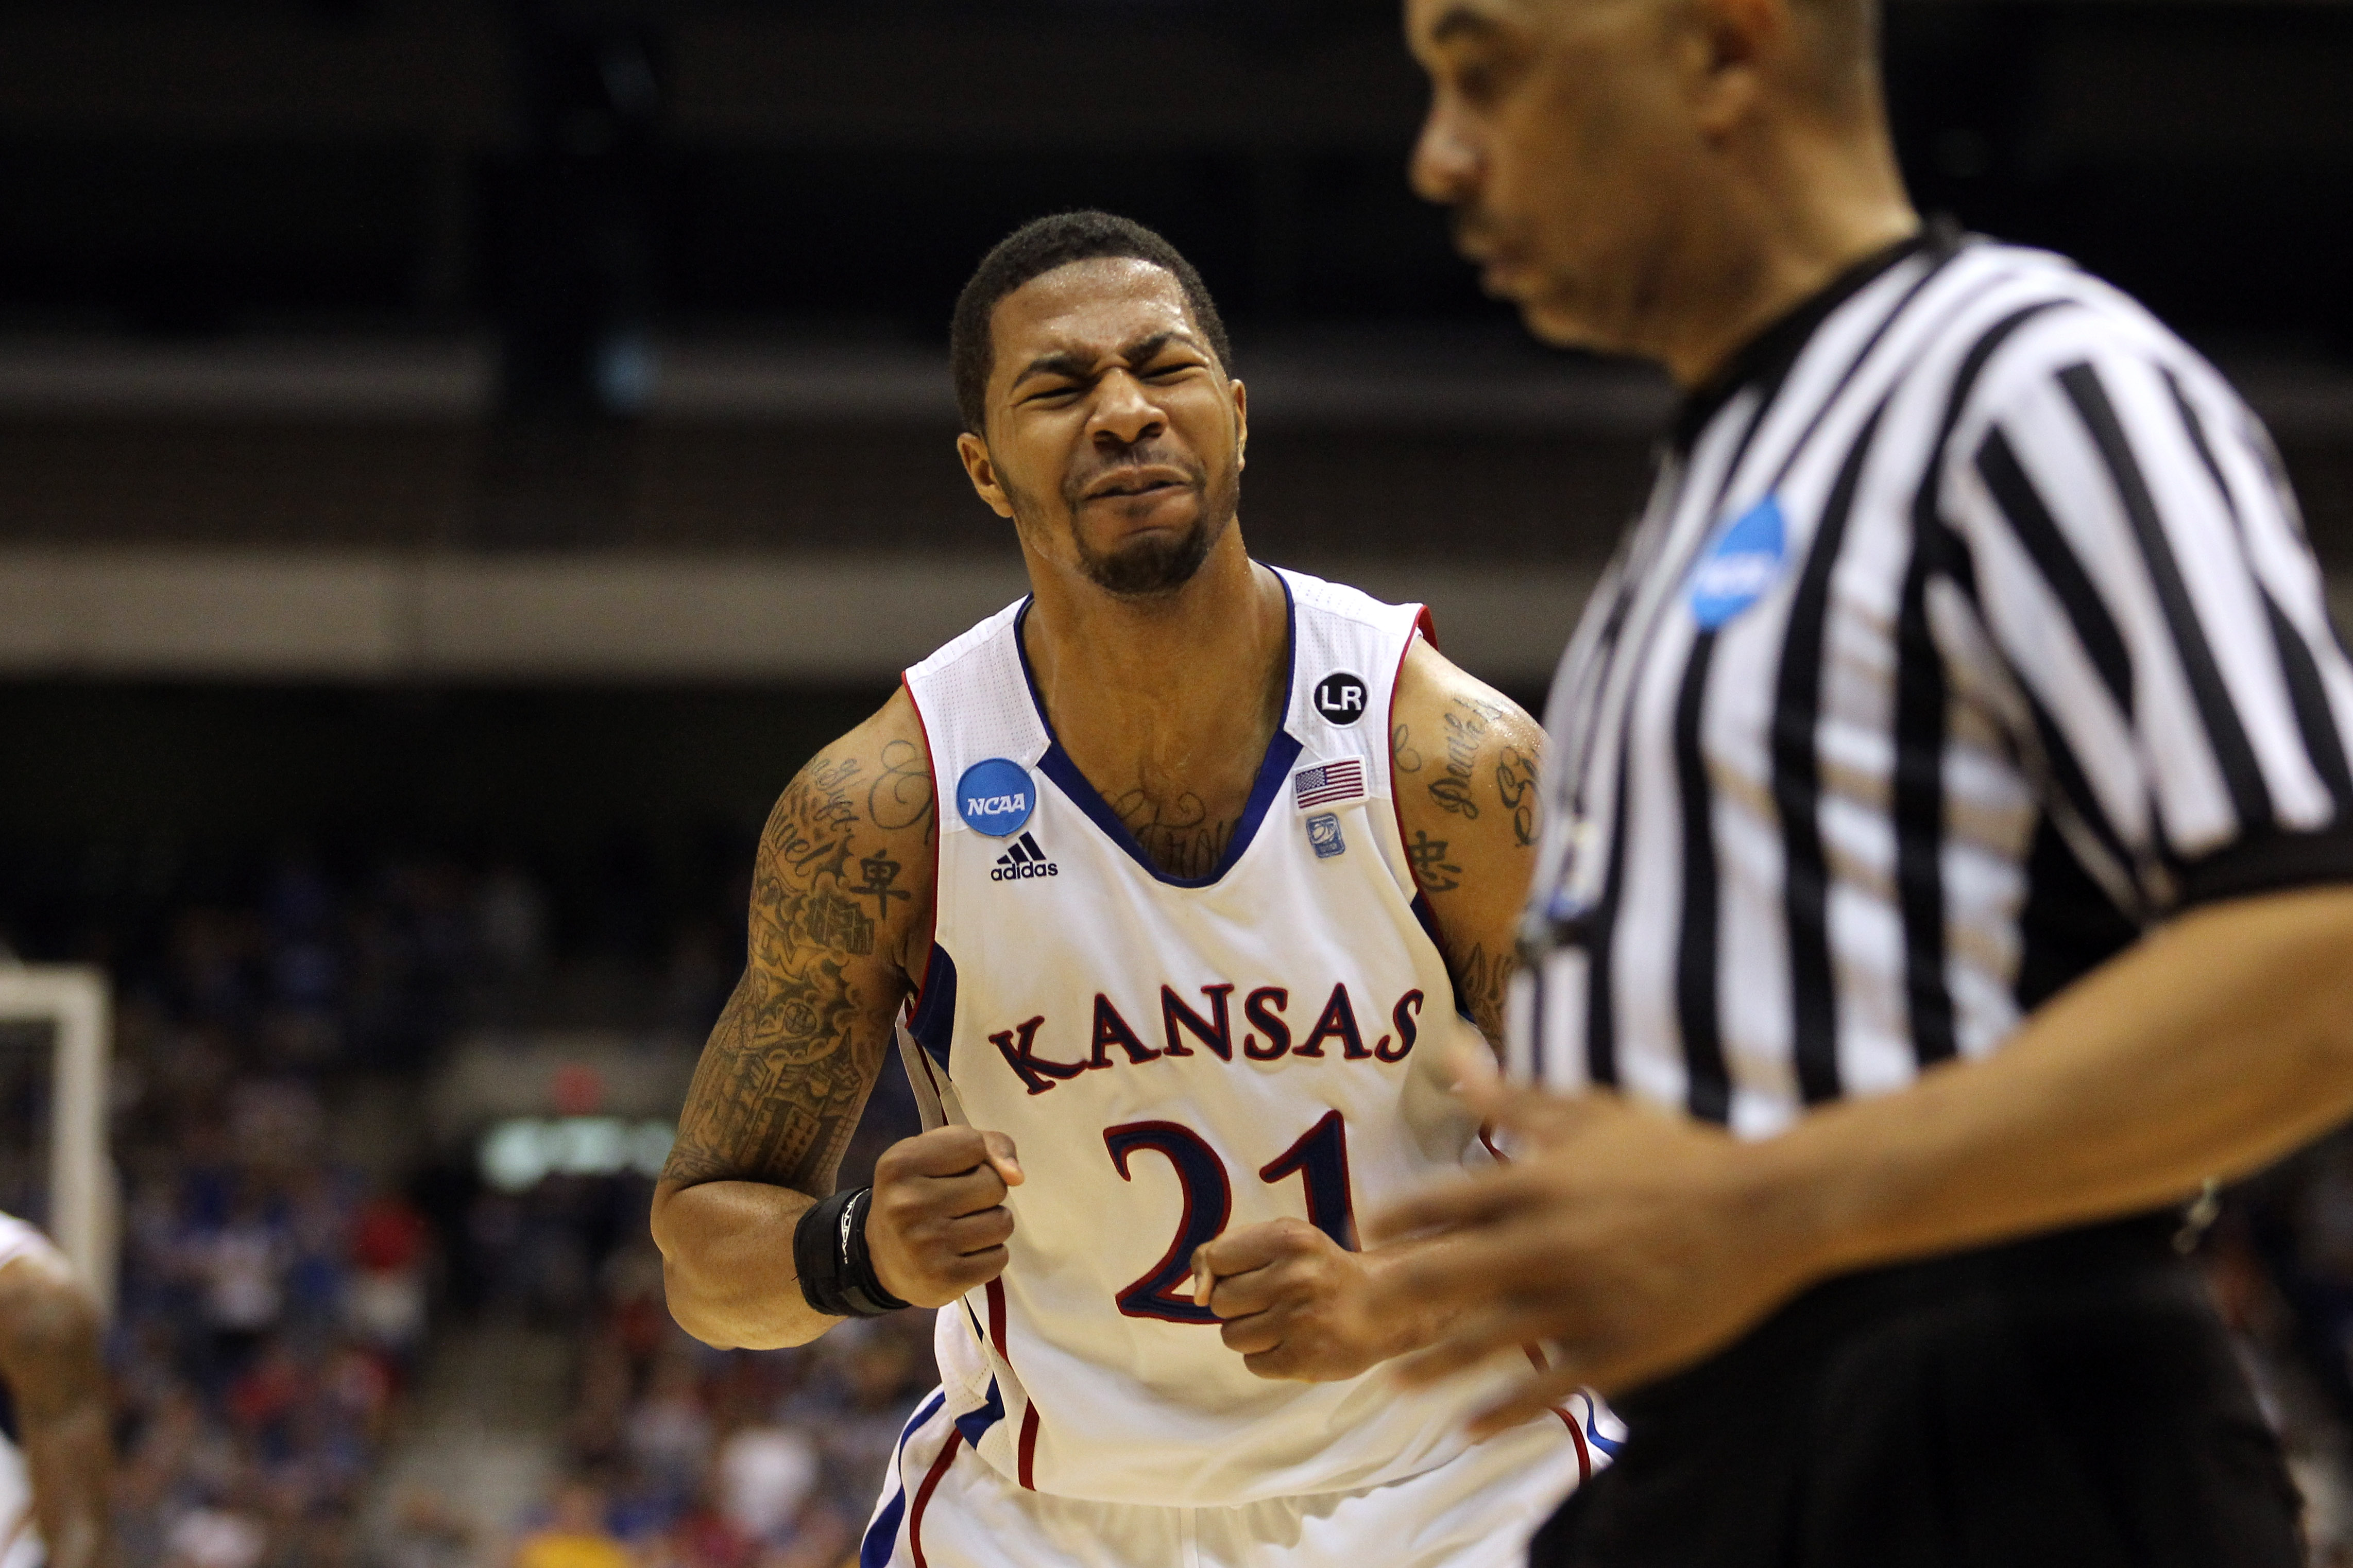 SAN ANTONIO, TX - MARCH 27:  Markieff Morris #21 of the Kansas Jayhawks reacts during the southwest regional final of the 2011 NCAA men's basketball tournament against the Virginia Commonwealth Rams at the Alamodome on March 27, 2011 in San Antonio, Texas